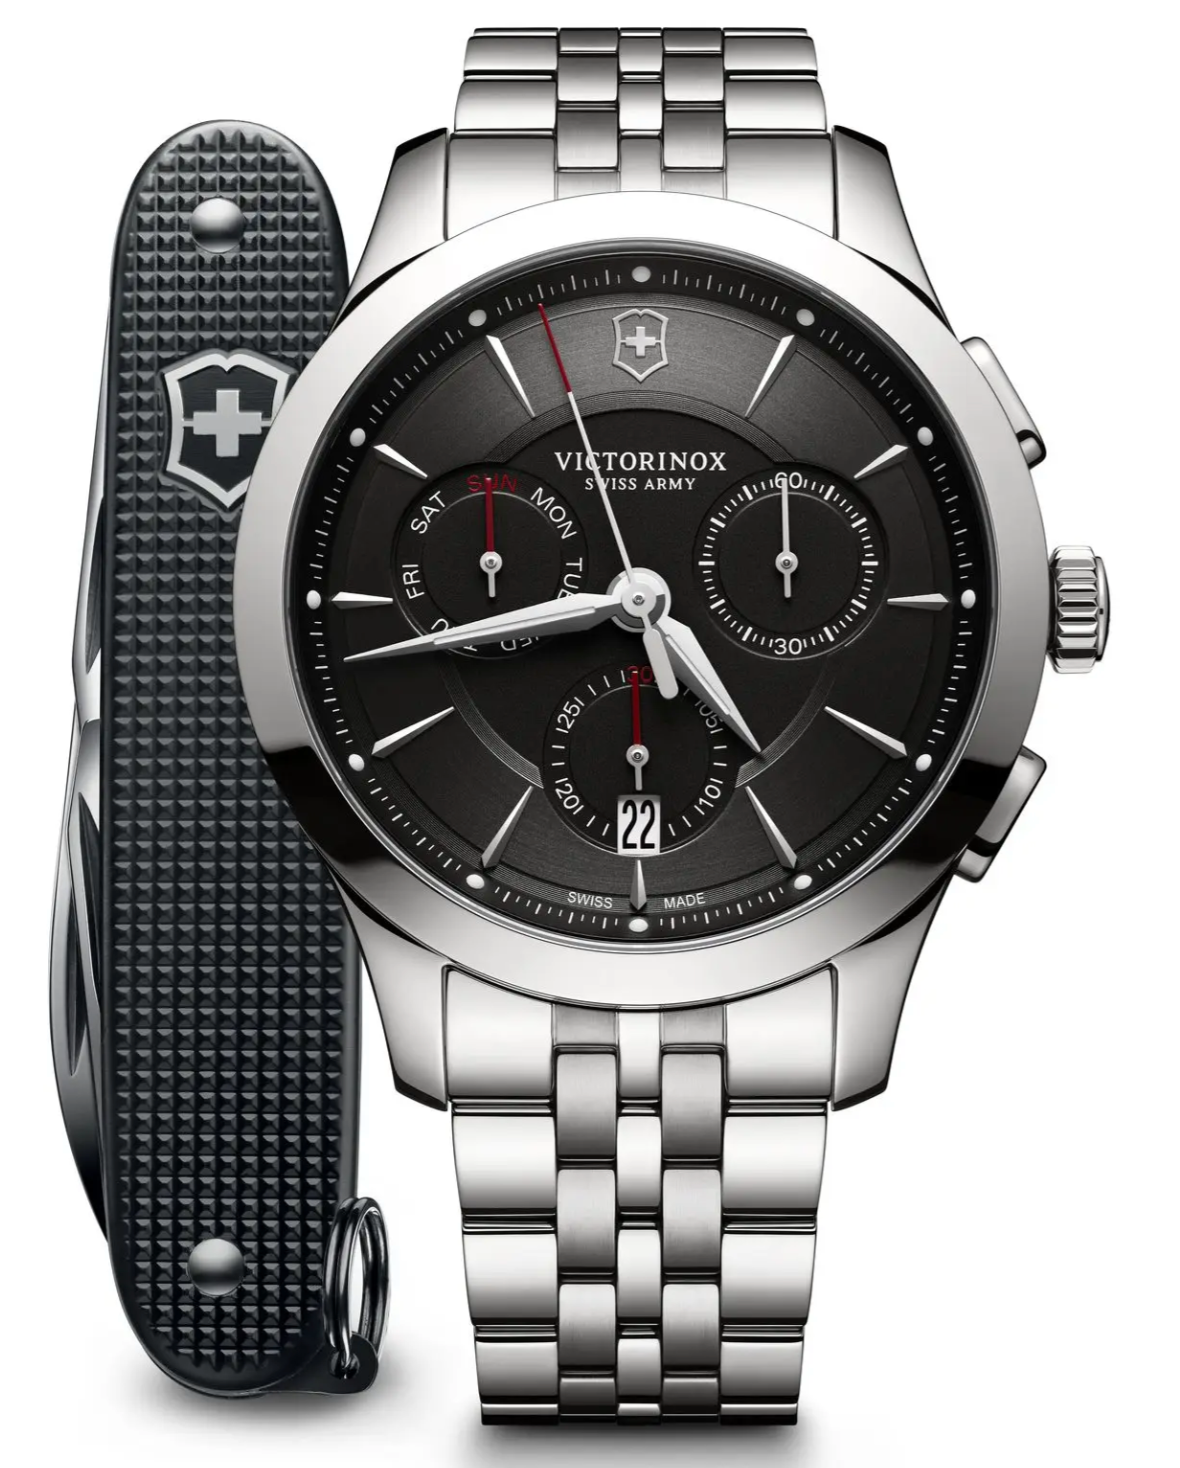 Victorinox Men's Watch Chronograph Black Dial Stainless Steel 241745.1